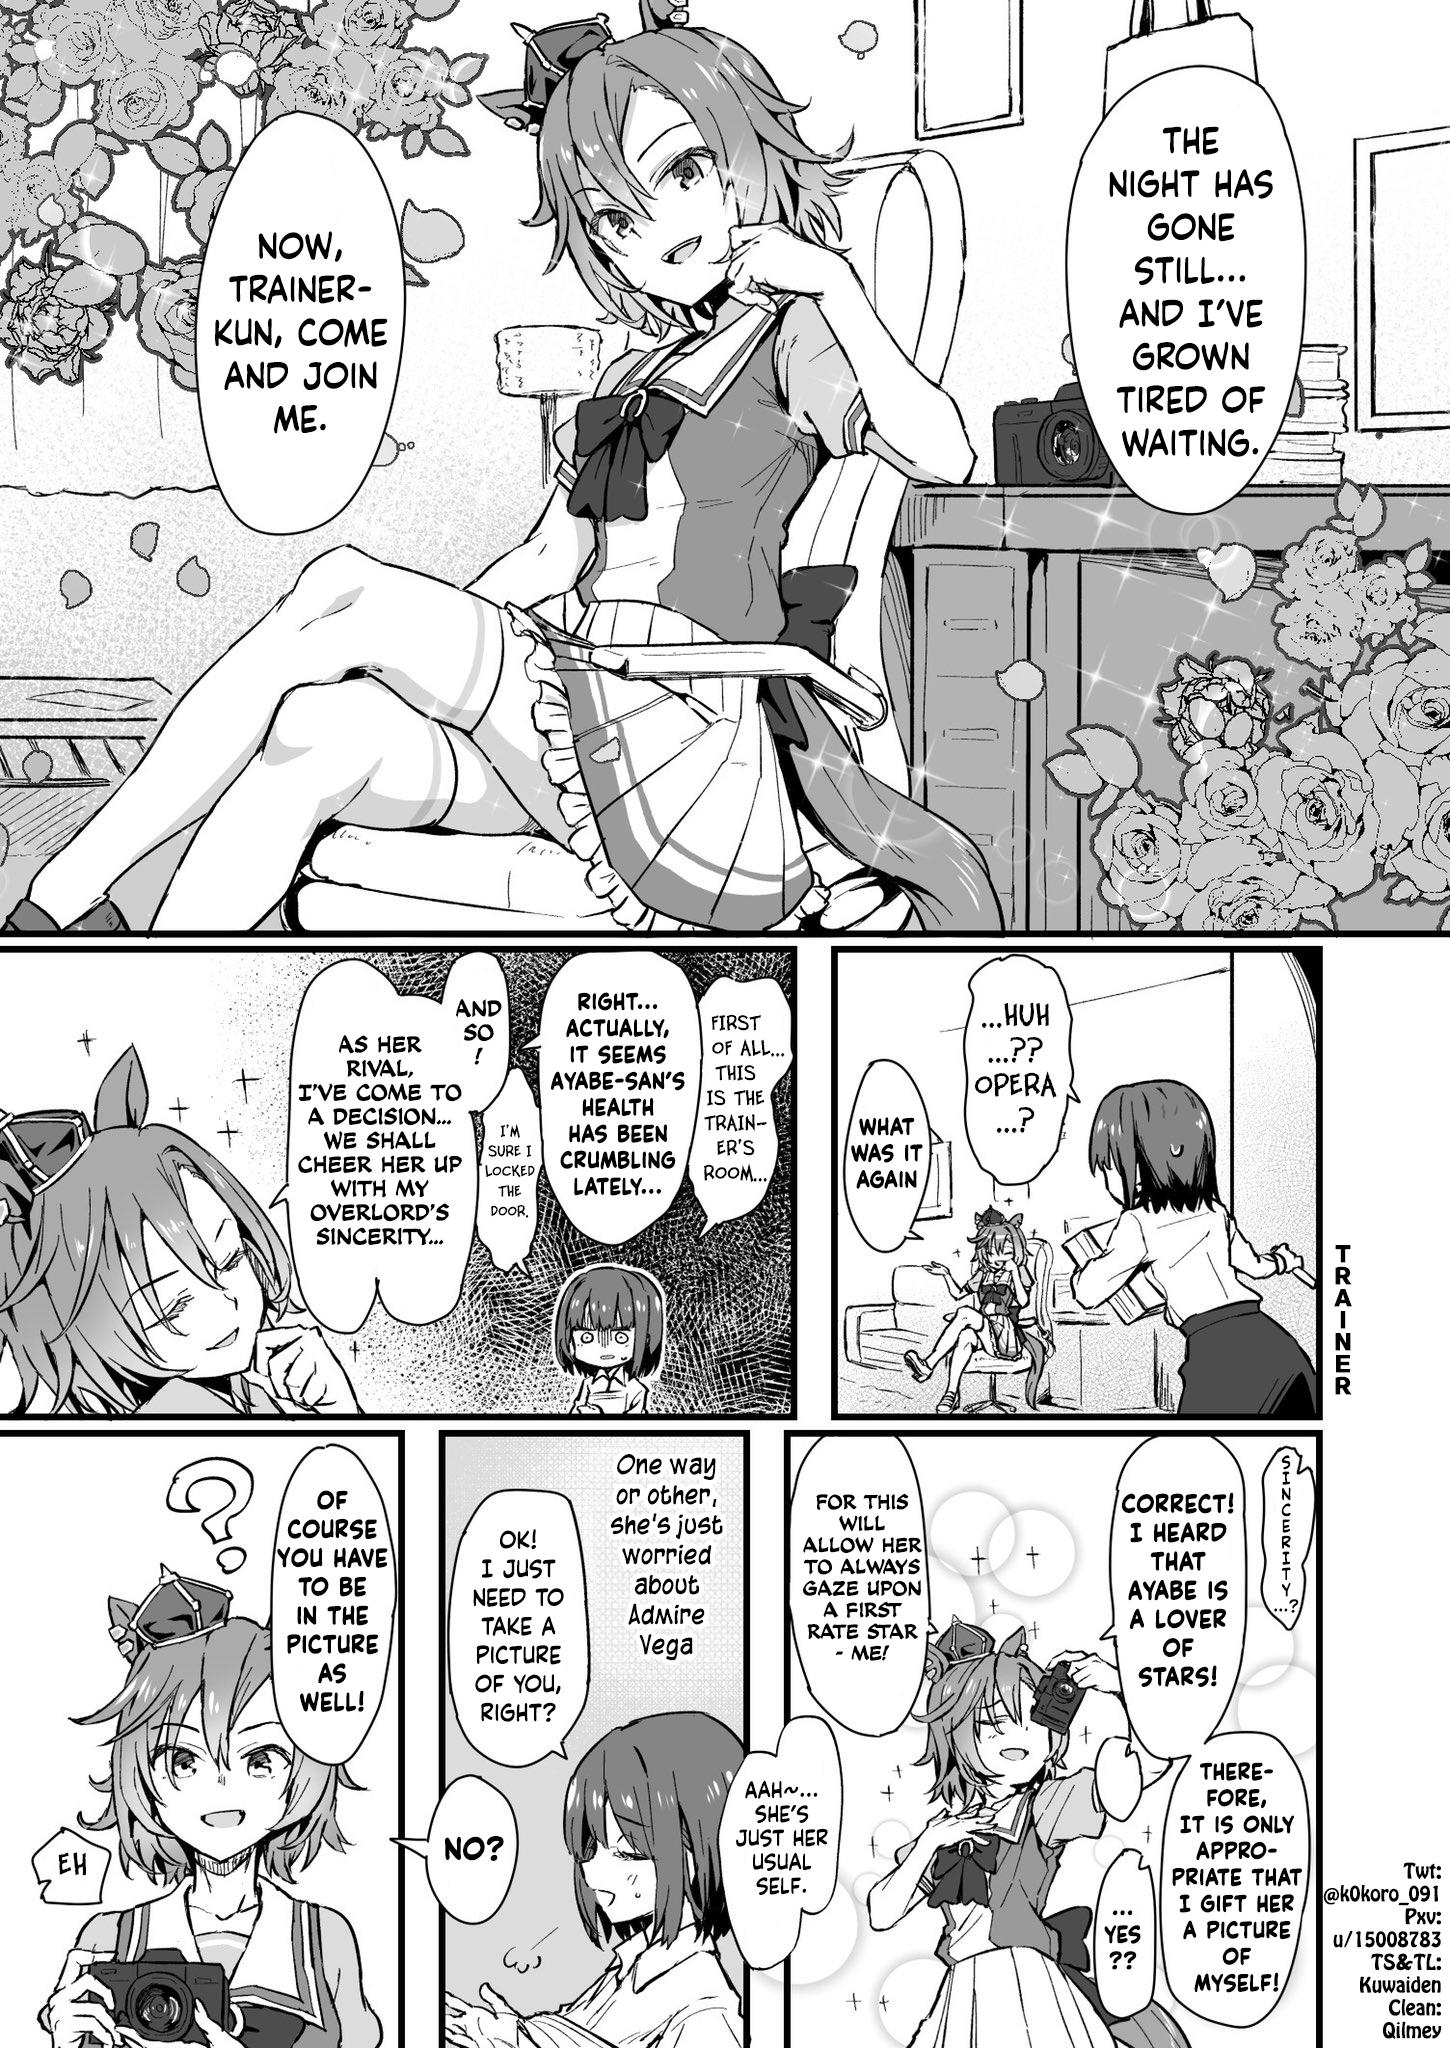 Kokoro-Sensei's Umamusume Shorts (Doujinshi) Chapter 7: Opera, Her Trainer, Ayabe, And Her Competitive Trainer - Picture 1